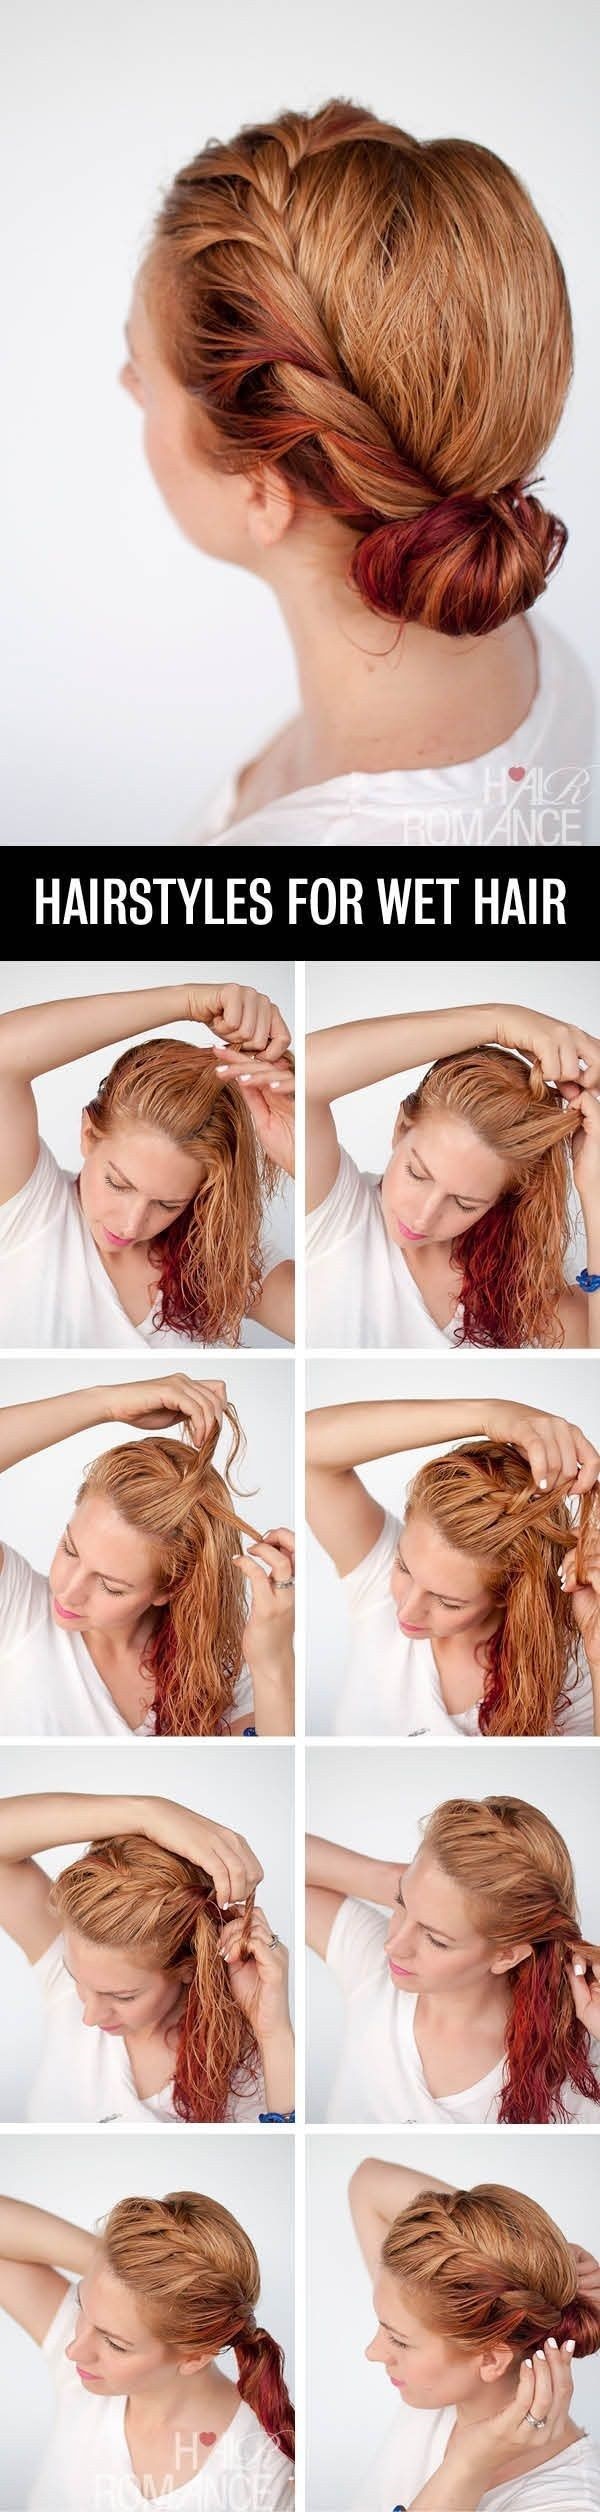 Simple Five Minute Hairstyles (29)